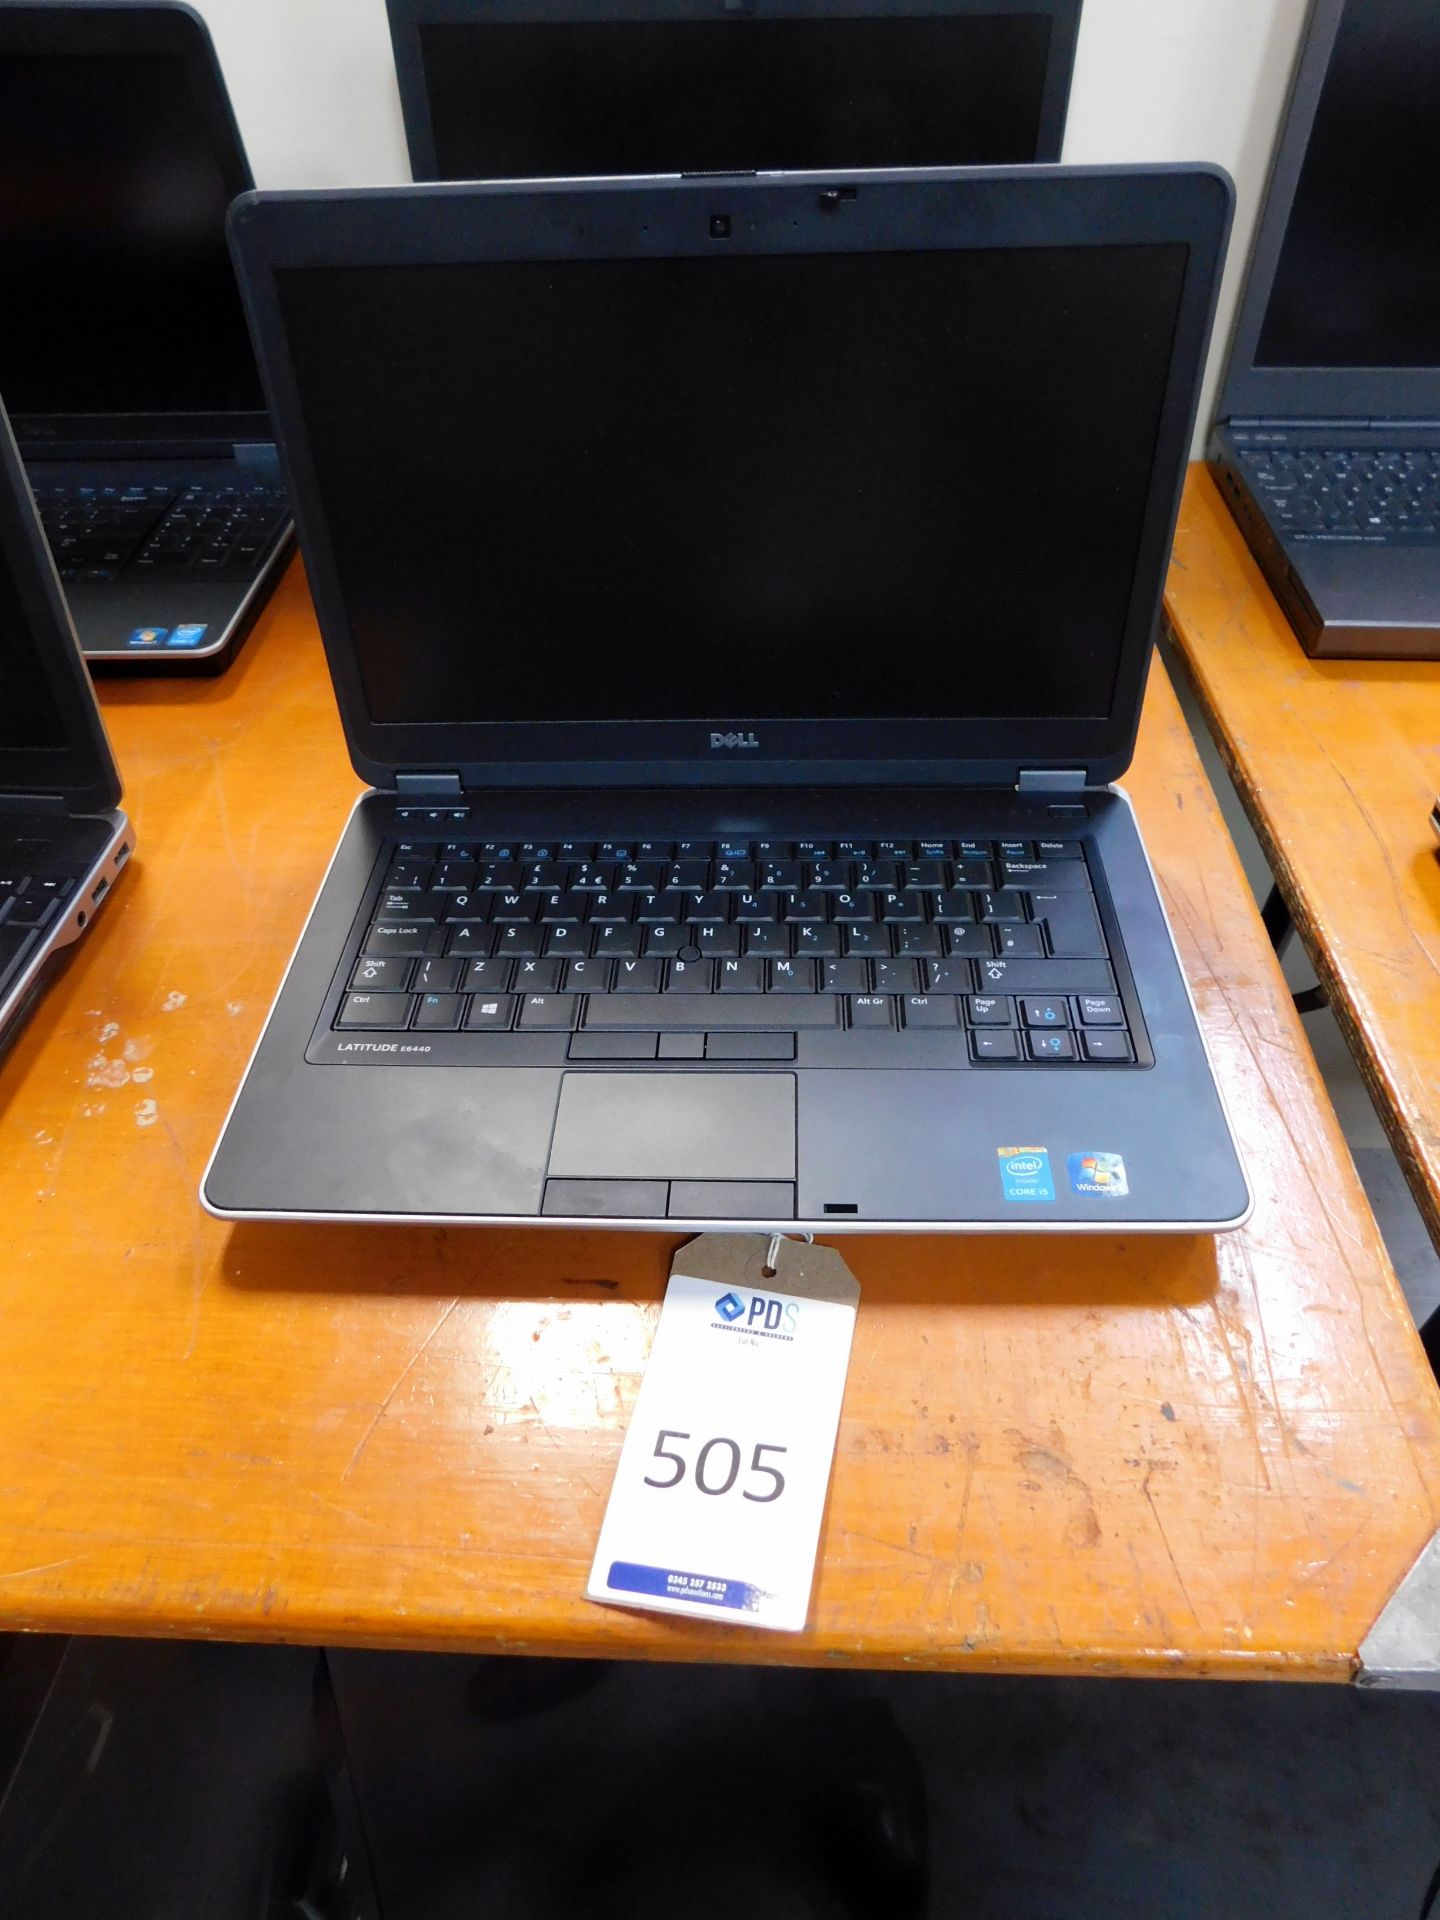 Dell Latitude E6440 Core I5 Laptop (No HDD) (Located Brentwood, See General Notes For More Details)